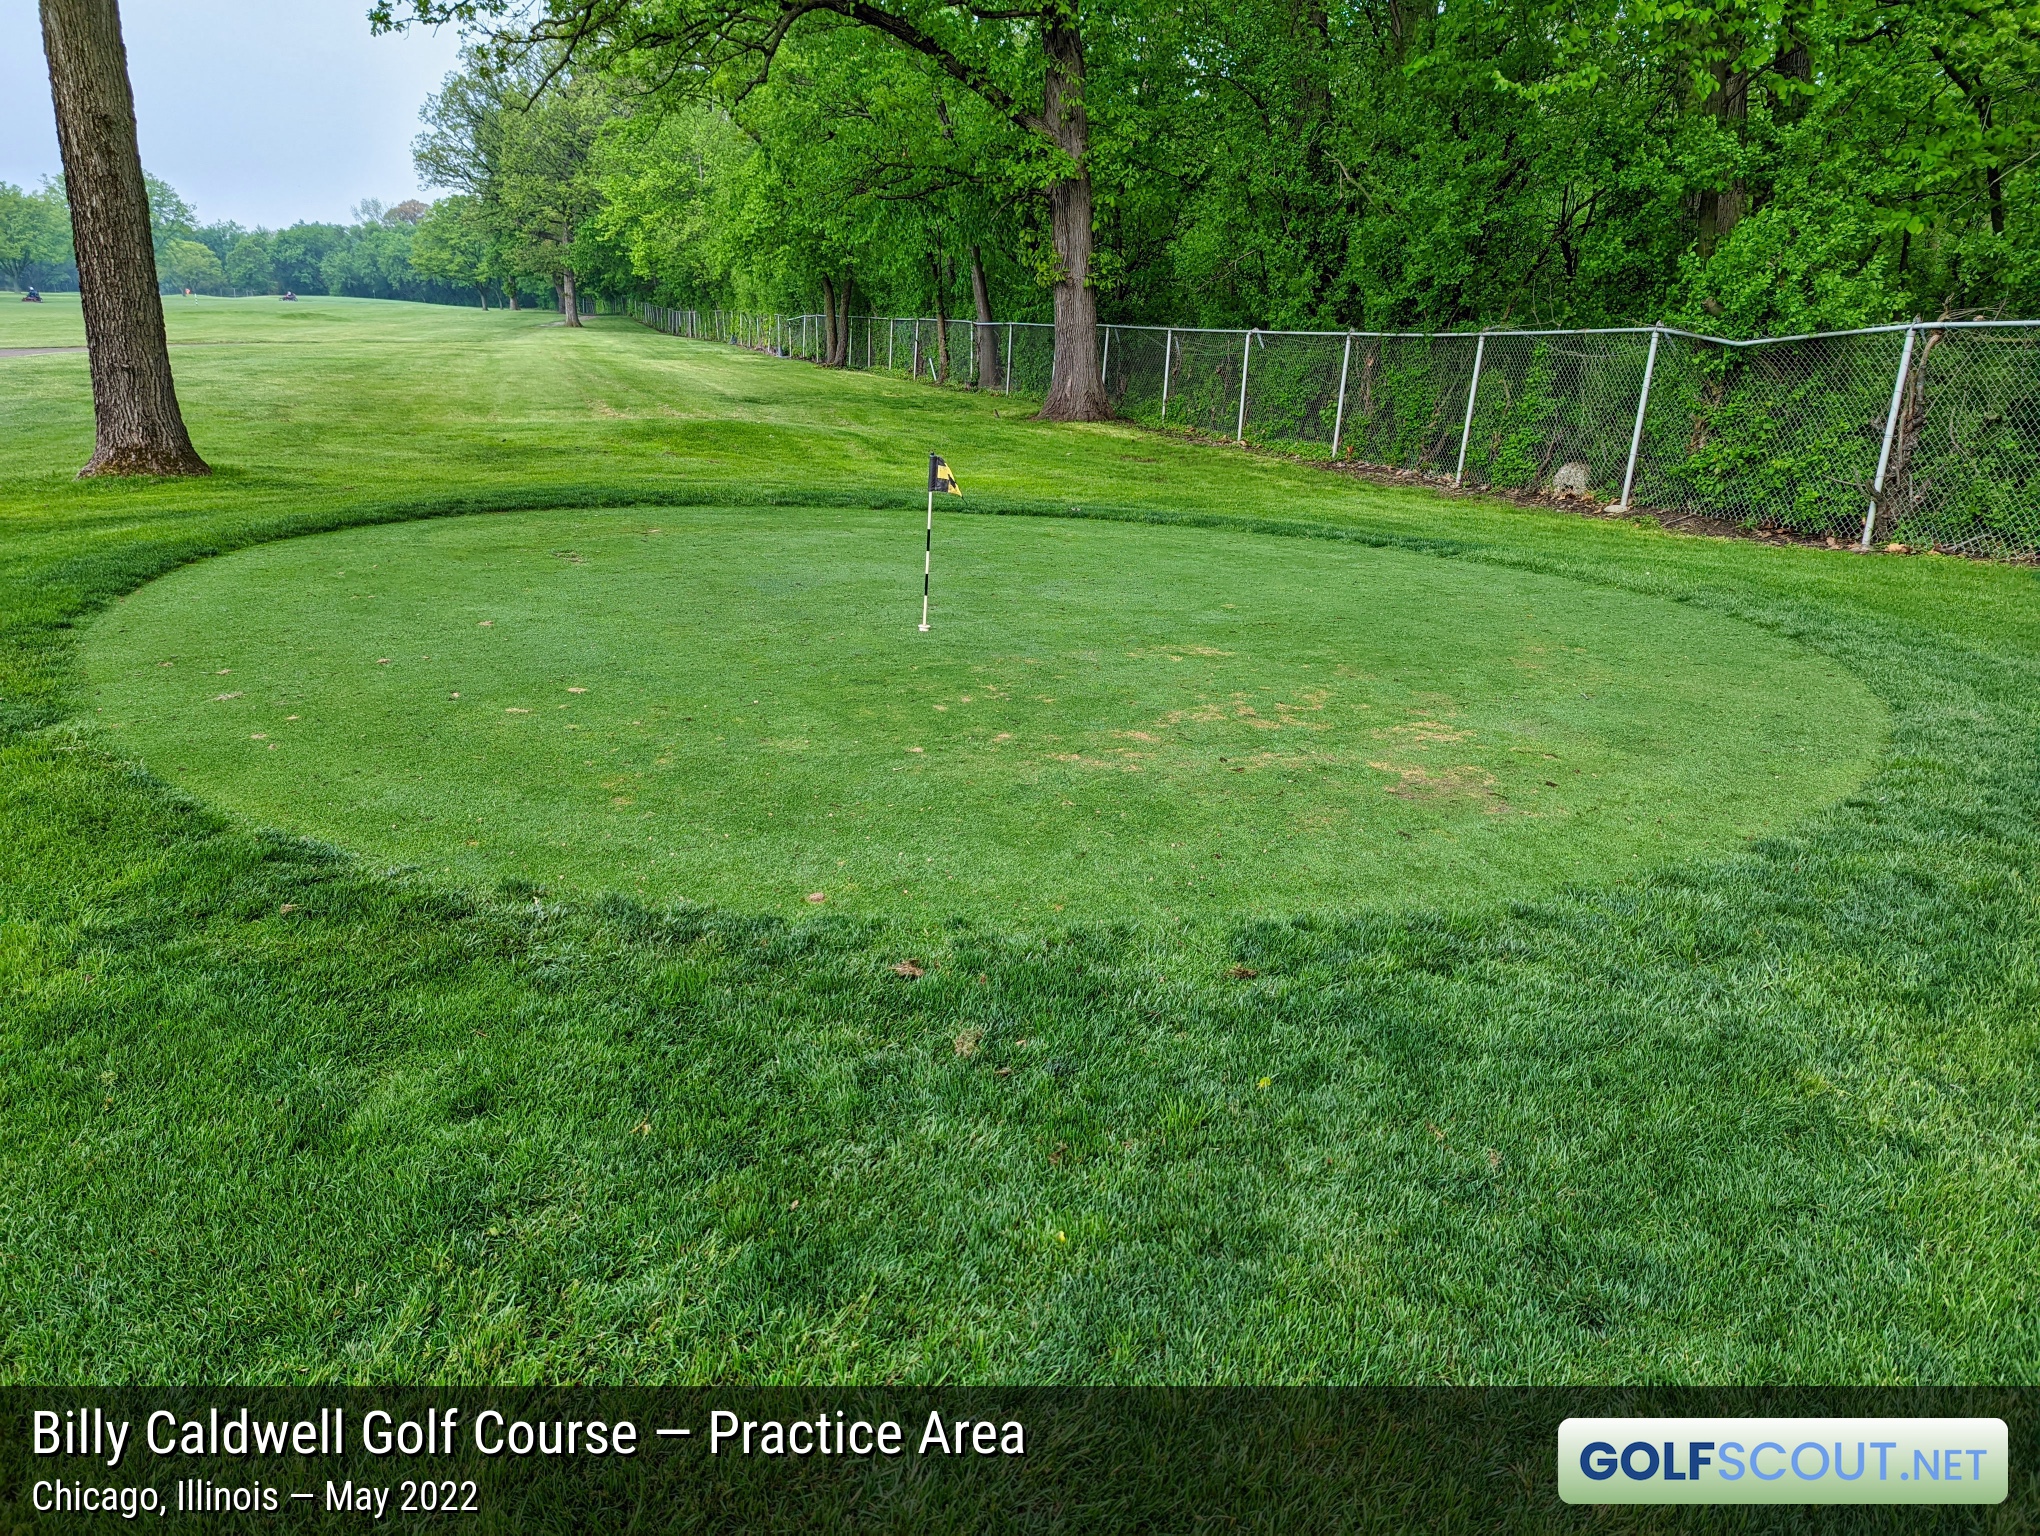 Photo of the practice area at Billy Caldwell Golf Course in Chicago, Illinois. This tiny practice green is to the right of the first tee.